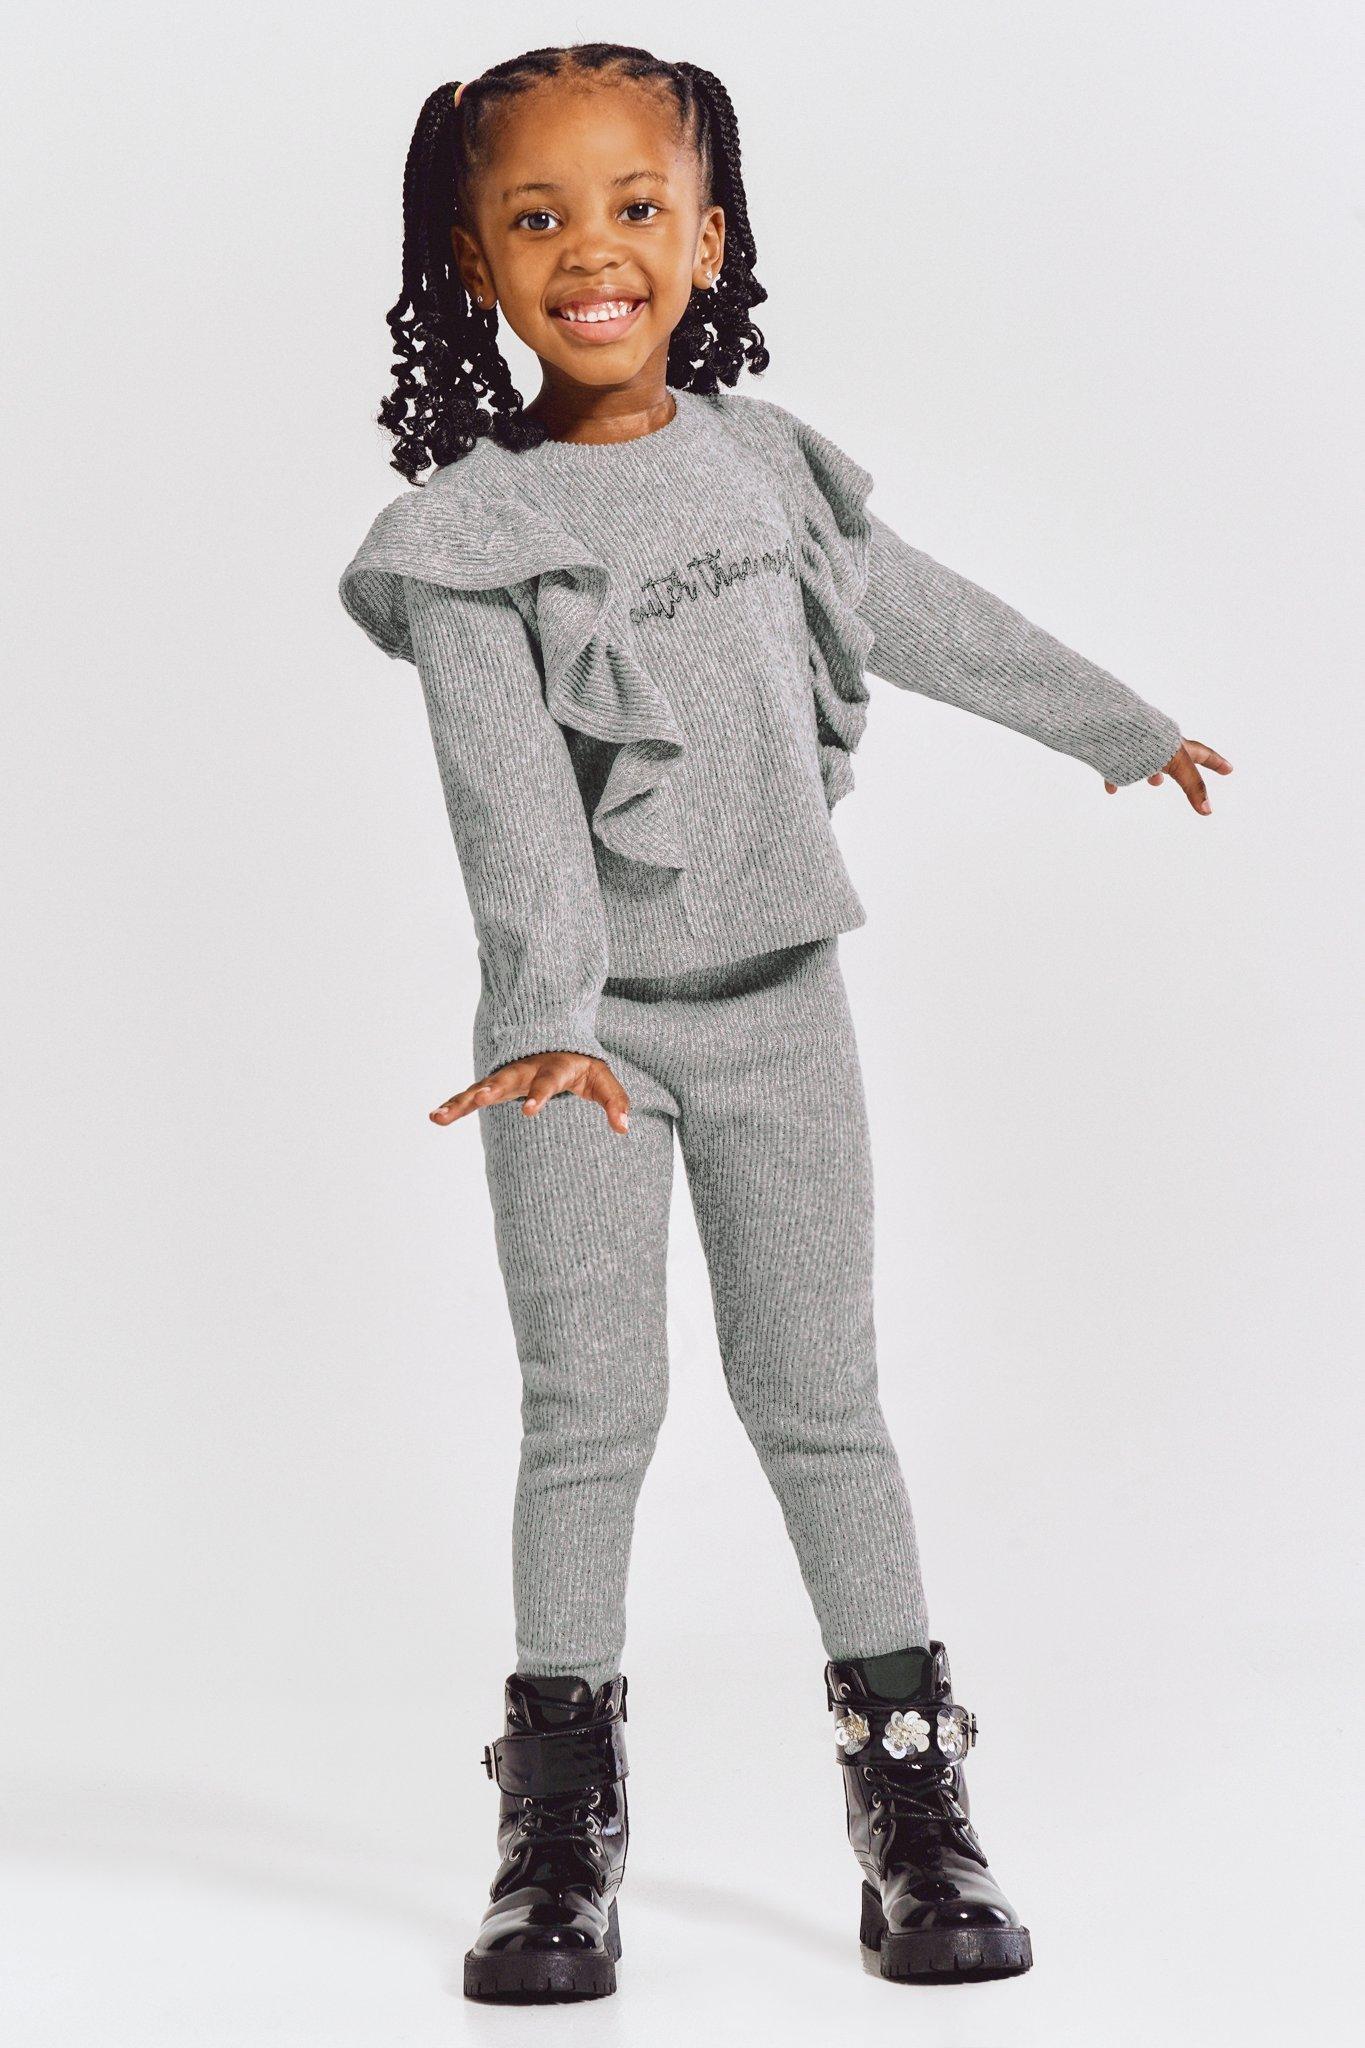 Girls 2-10 Years clothes & accessories online at Ackermans